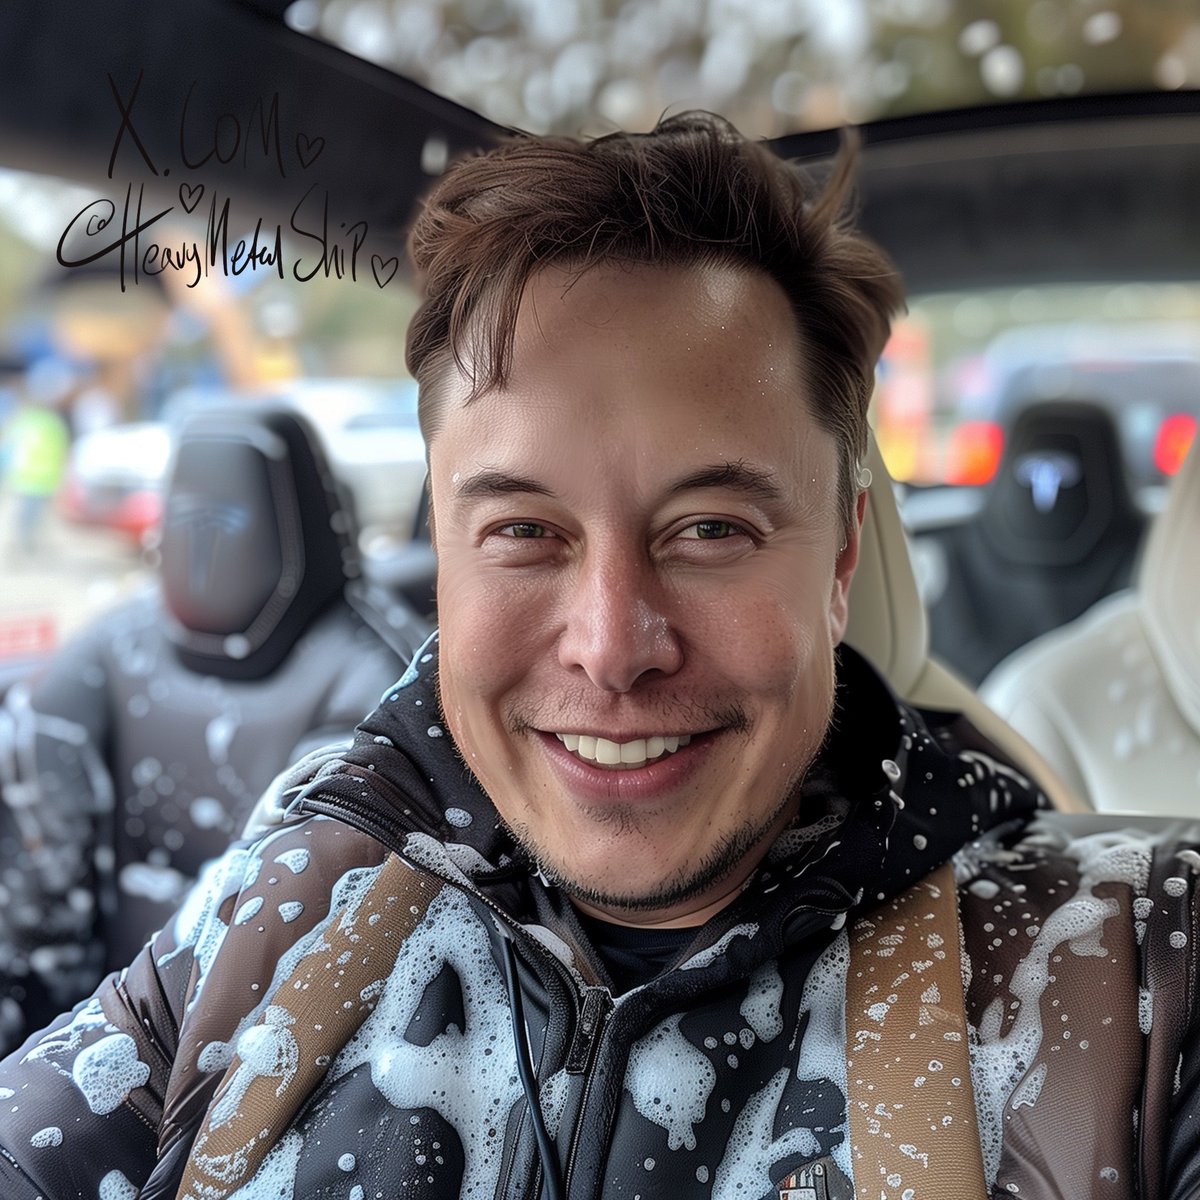 While Elon was driving yesterday and showing off his self driving Tesla, he noticed that his car was pretty dirty from all the adventures he’s been going on and so today Elon is shampooing and detailing the interior of his Tesla! ✨🚘🫧 Do you like to clean your car?